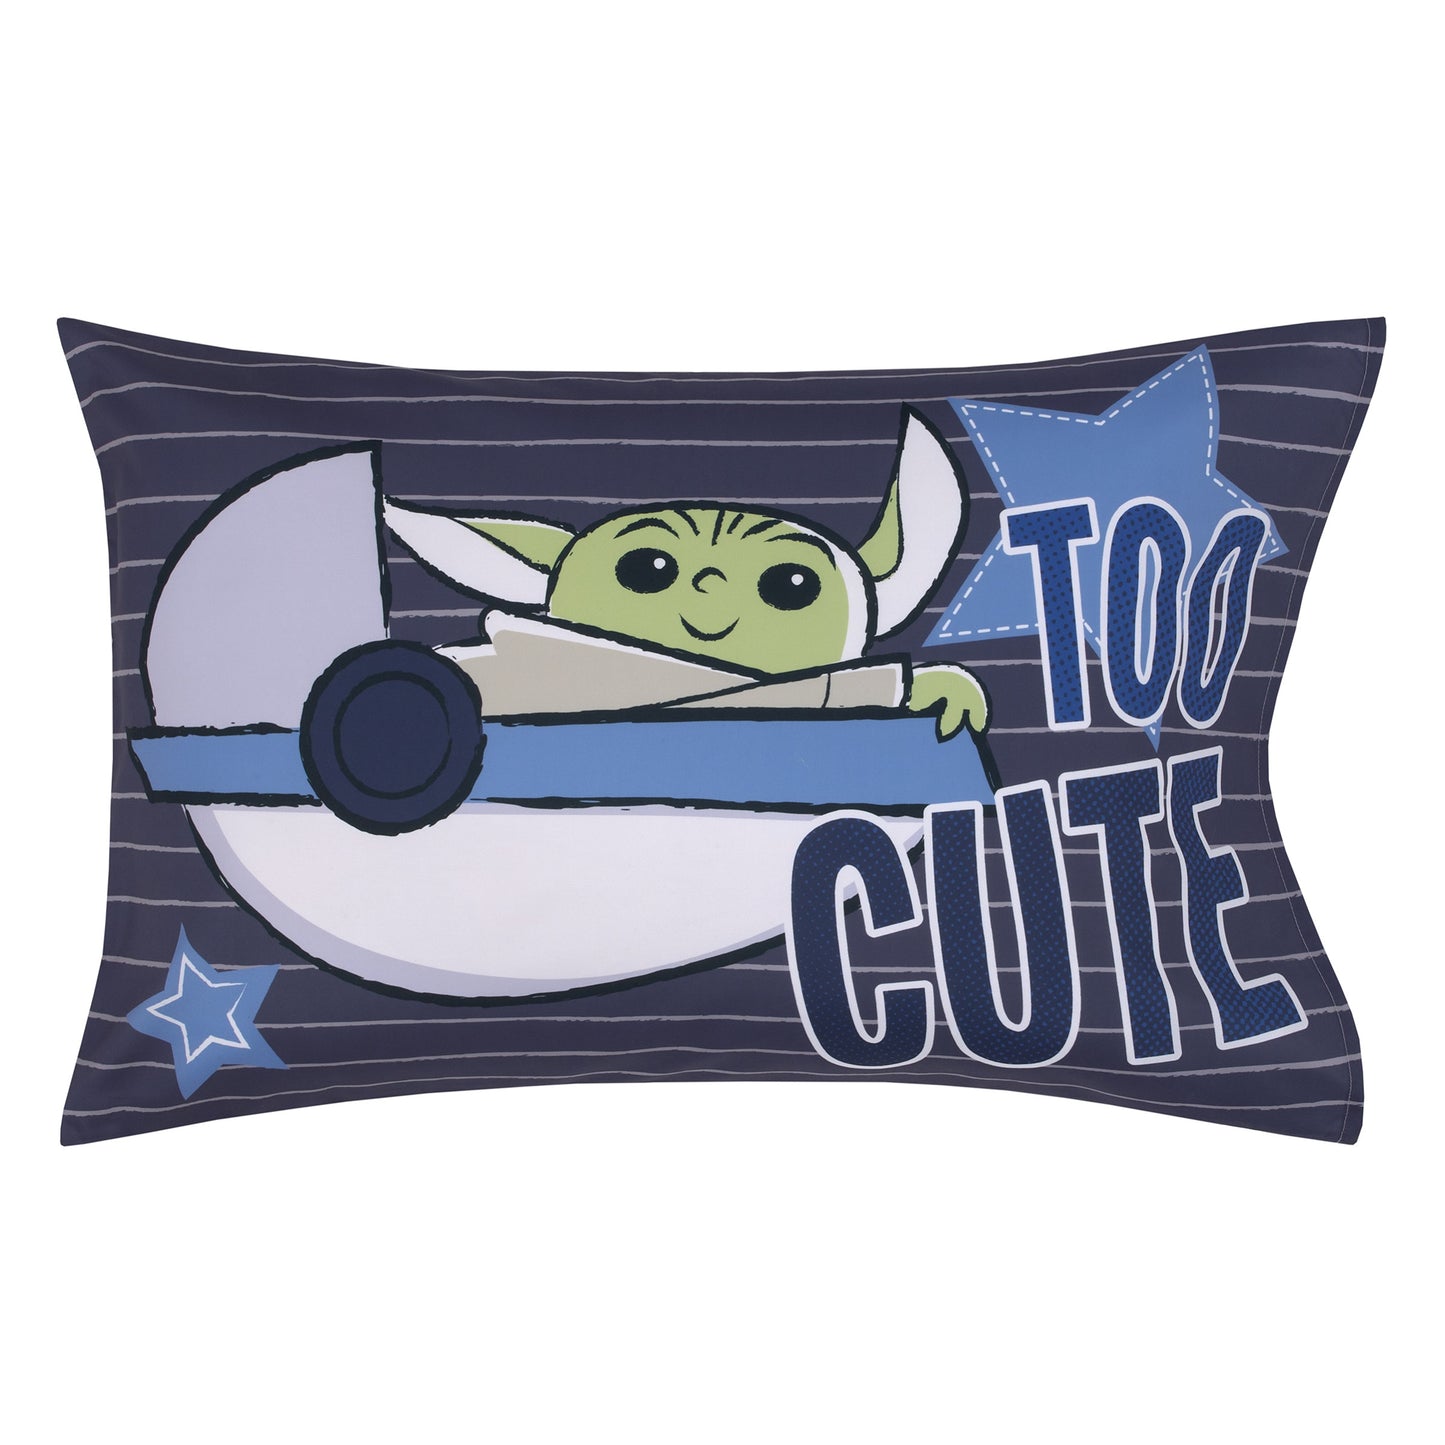 Star Wars The Child Cutest in the Galaxy Blue, Green, and Gray Grogu and Hover Pod 2 Piece Toddler Sheet Set - Fitted Bottom Sheet and Reversible Pillowcase